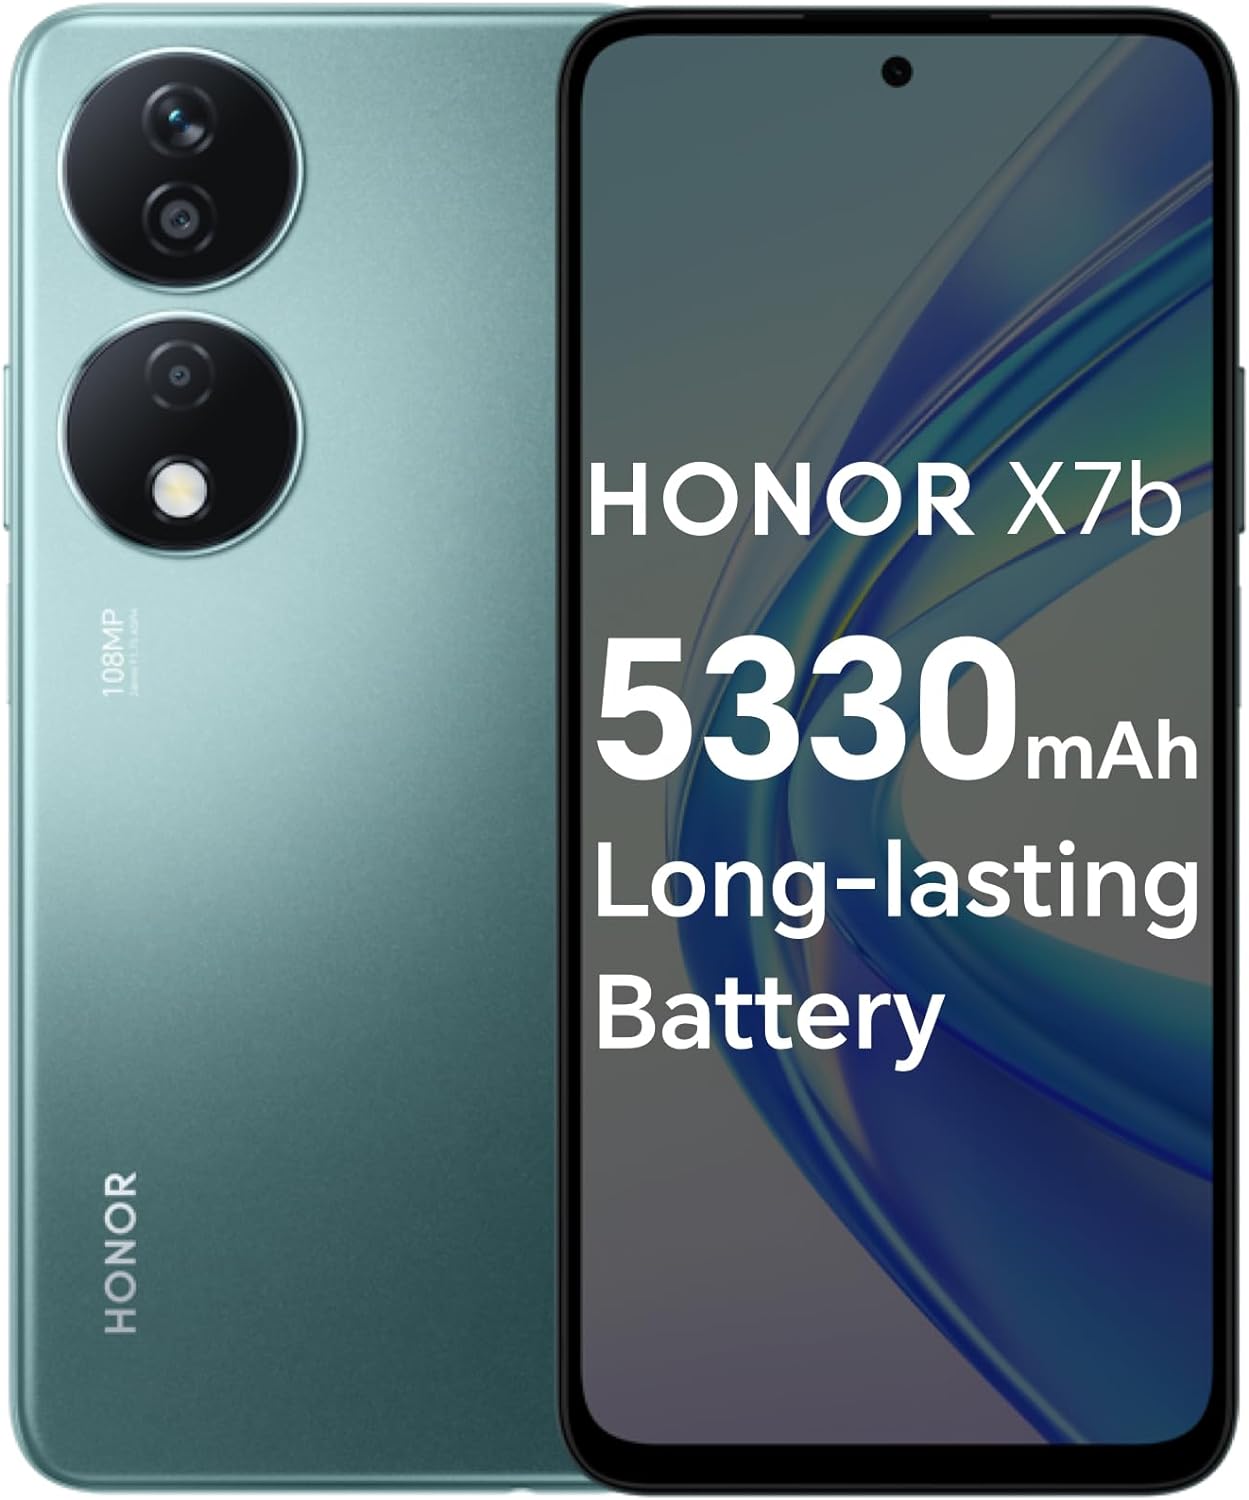 The HONOR X7b mobile phone